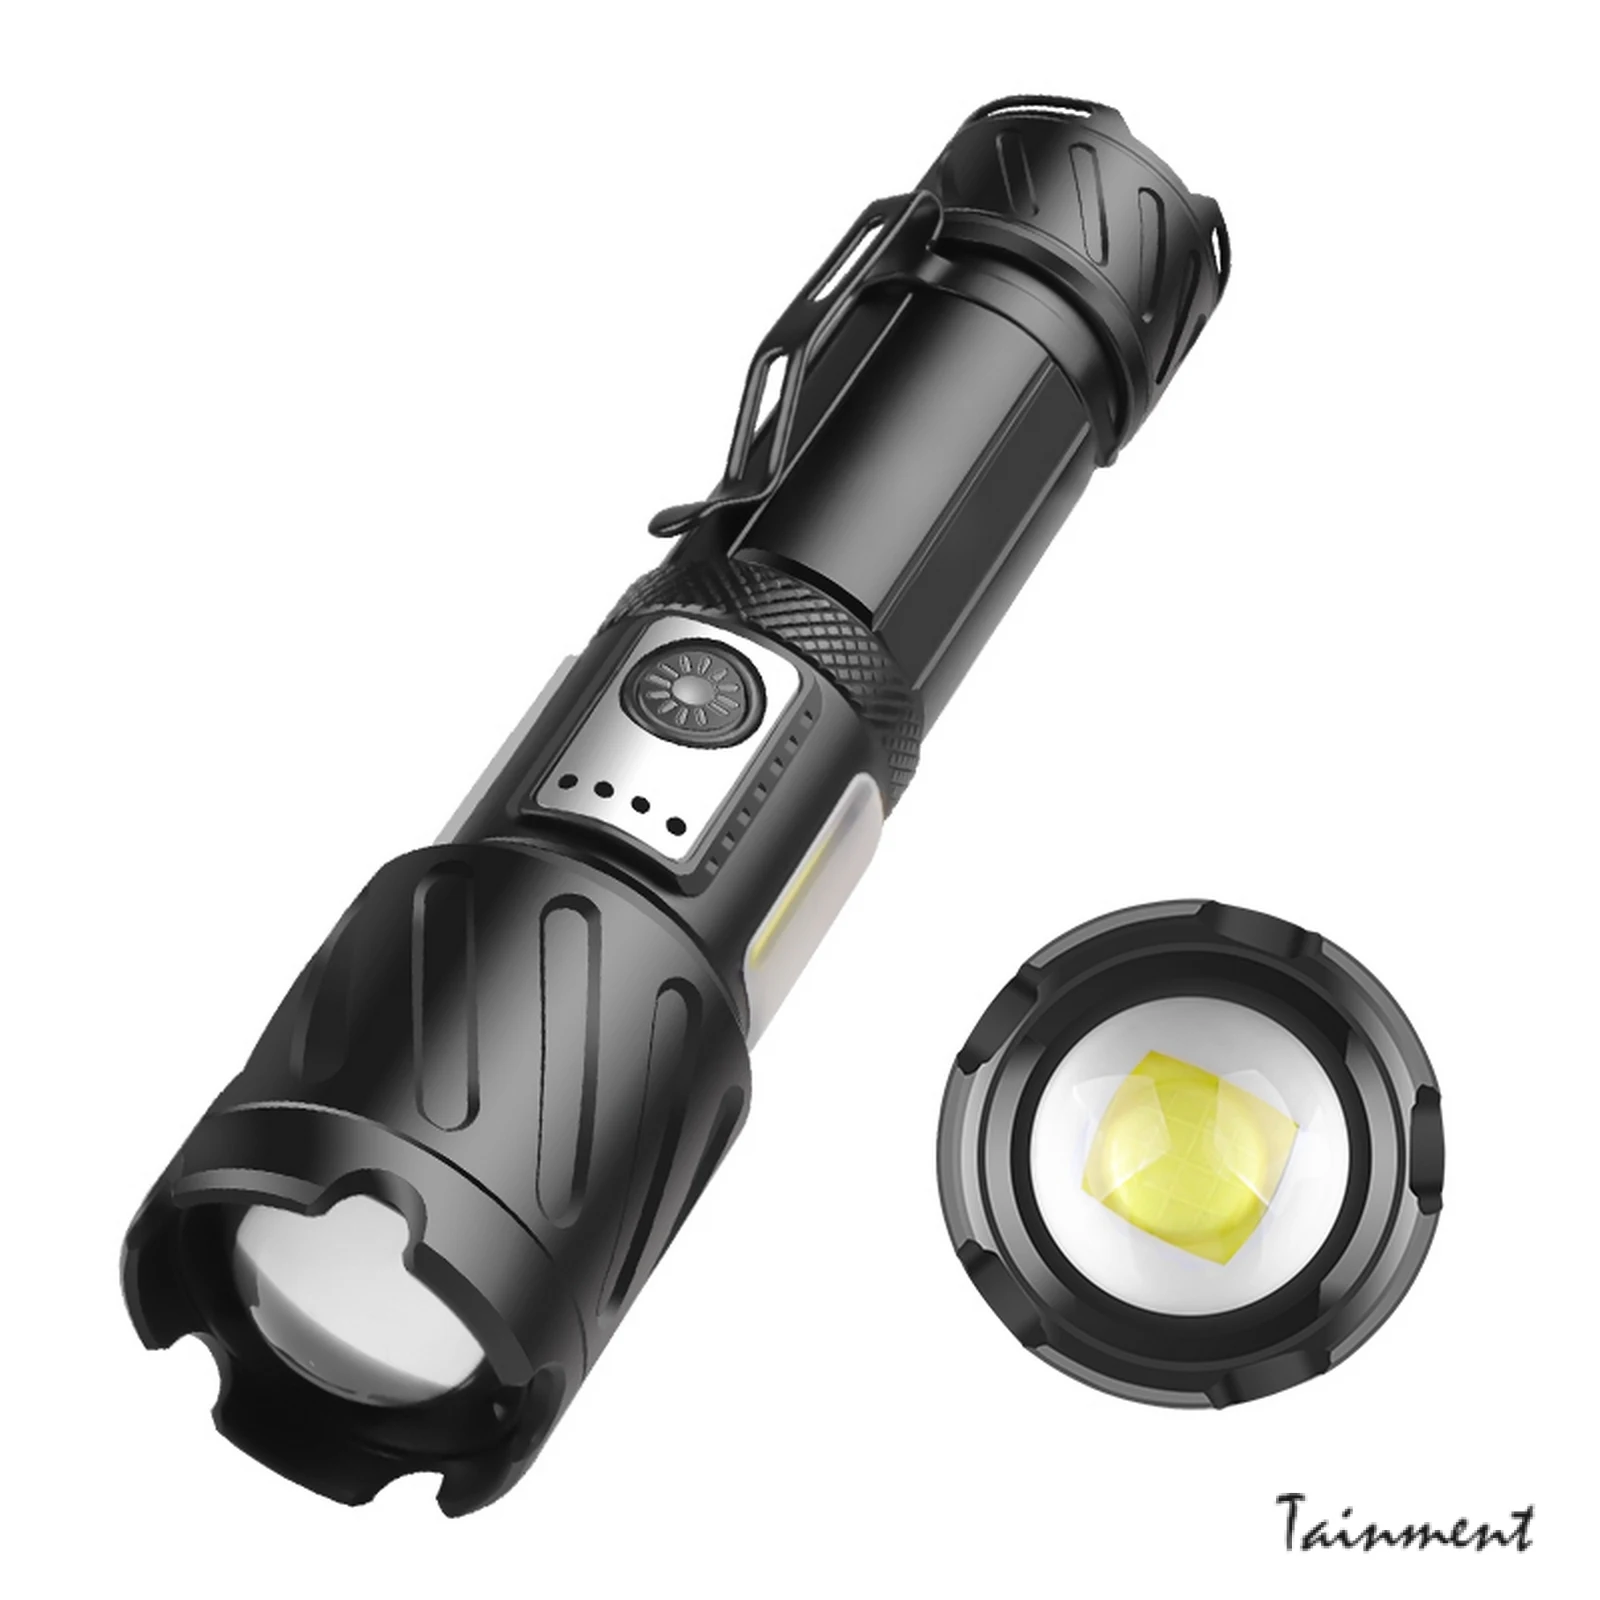 

10000 Lumens USB Rechargeable Torch, XHP160 COB Torch, 5000 mAh with 6 Light Modes, Zoomable for Camping/Hiking Emergencies